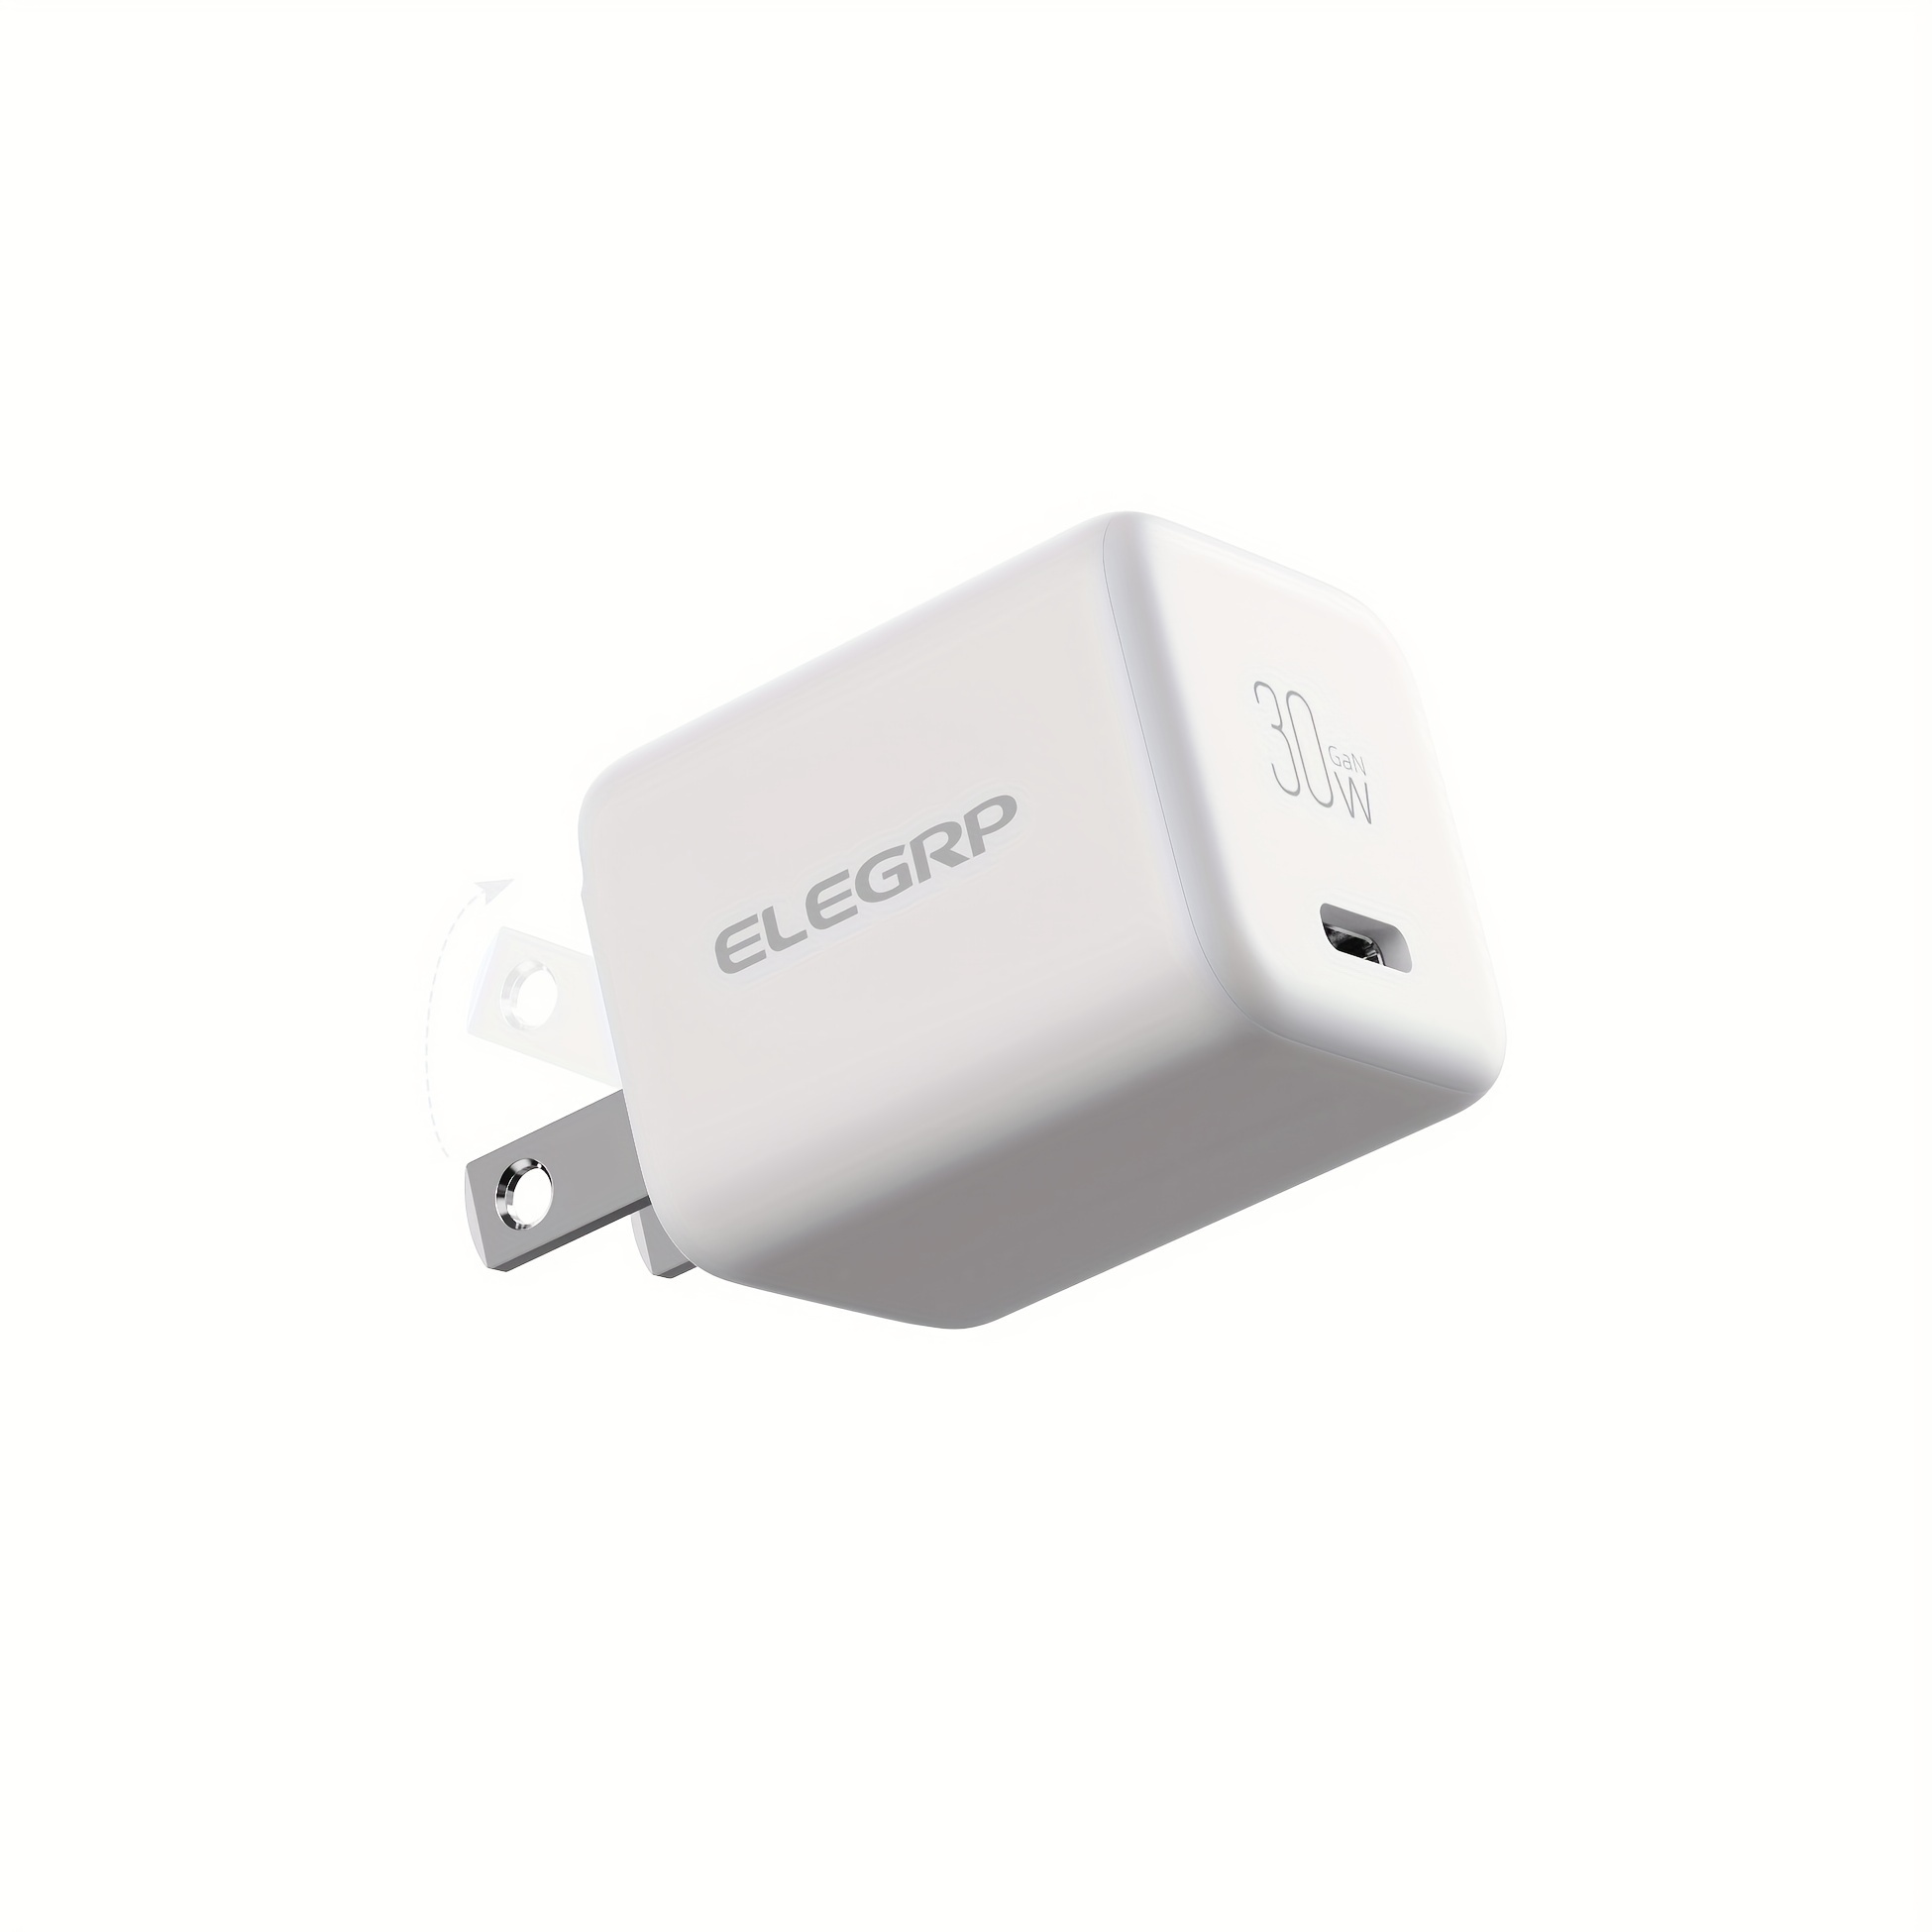 

Elegrp 30w Usb C Gan Charger Cube, Pd Power Delivery Fast Type C Charging Block, Wall Charger With Foldable Plug For 14/13/12/11, Xs/xr/x, Ipad, Pixel, Airpods, Galaxy And More